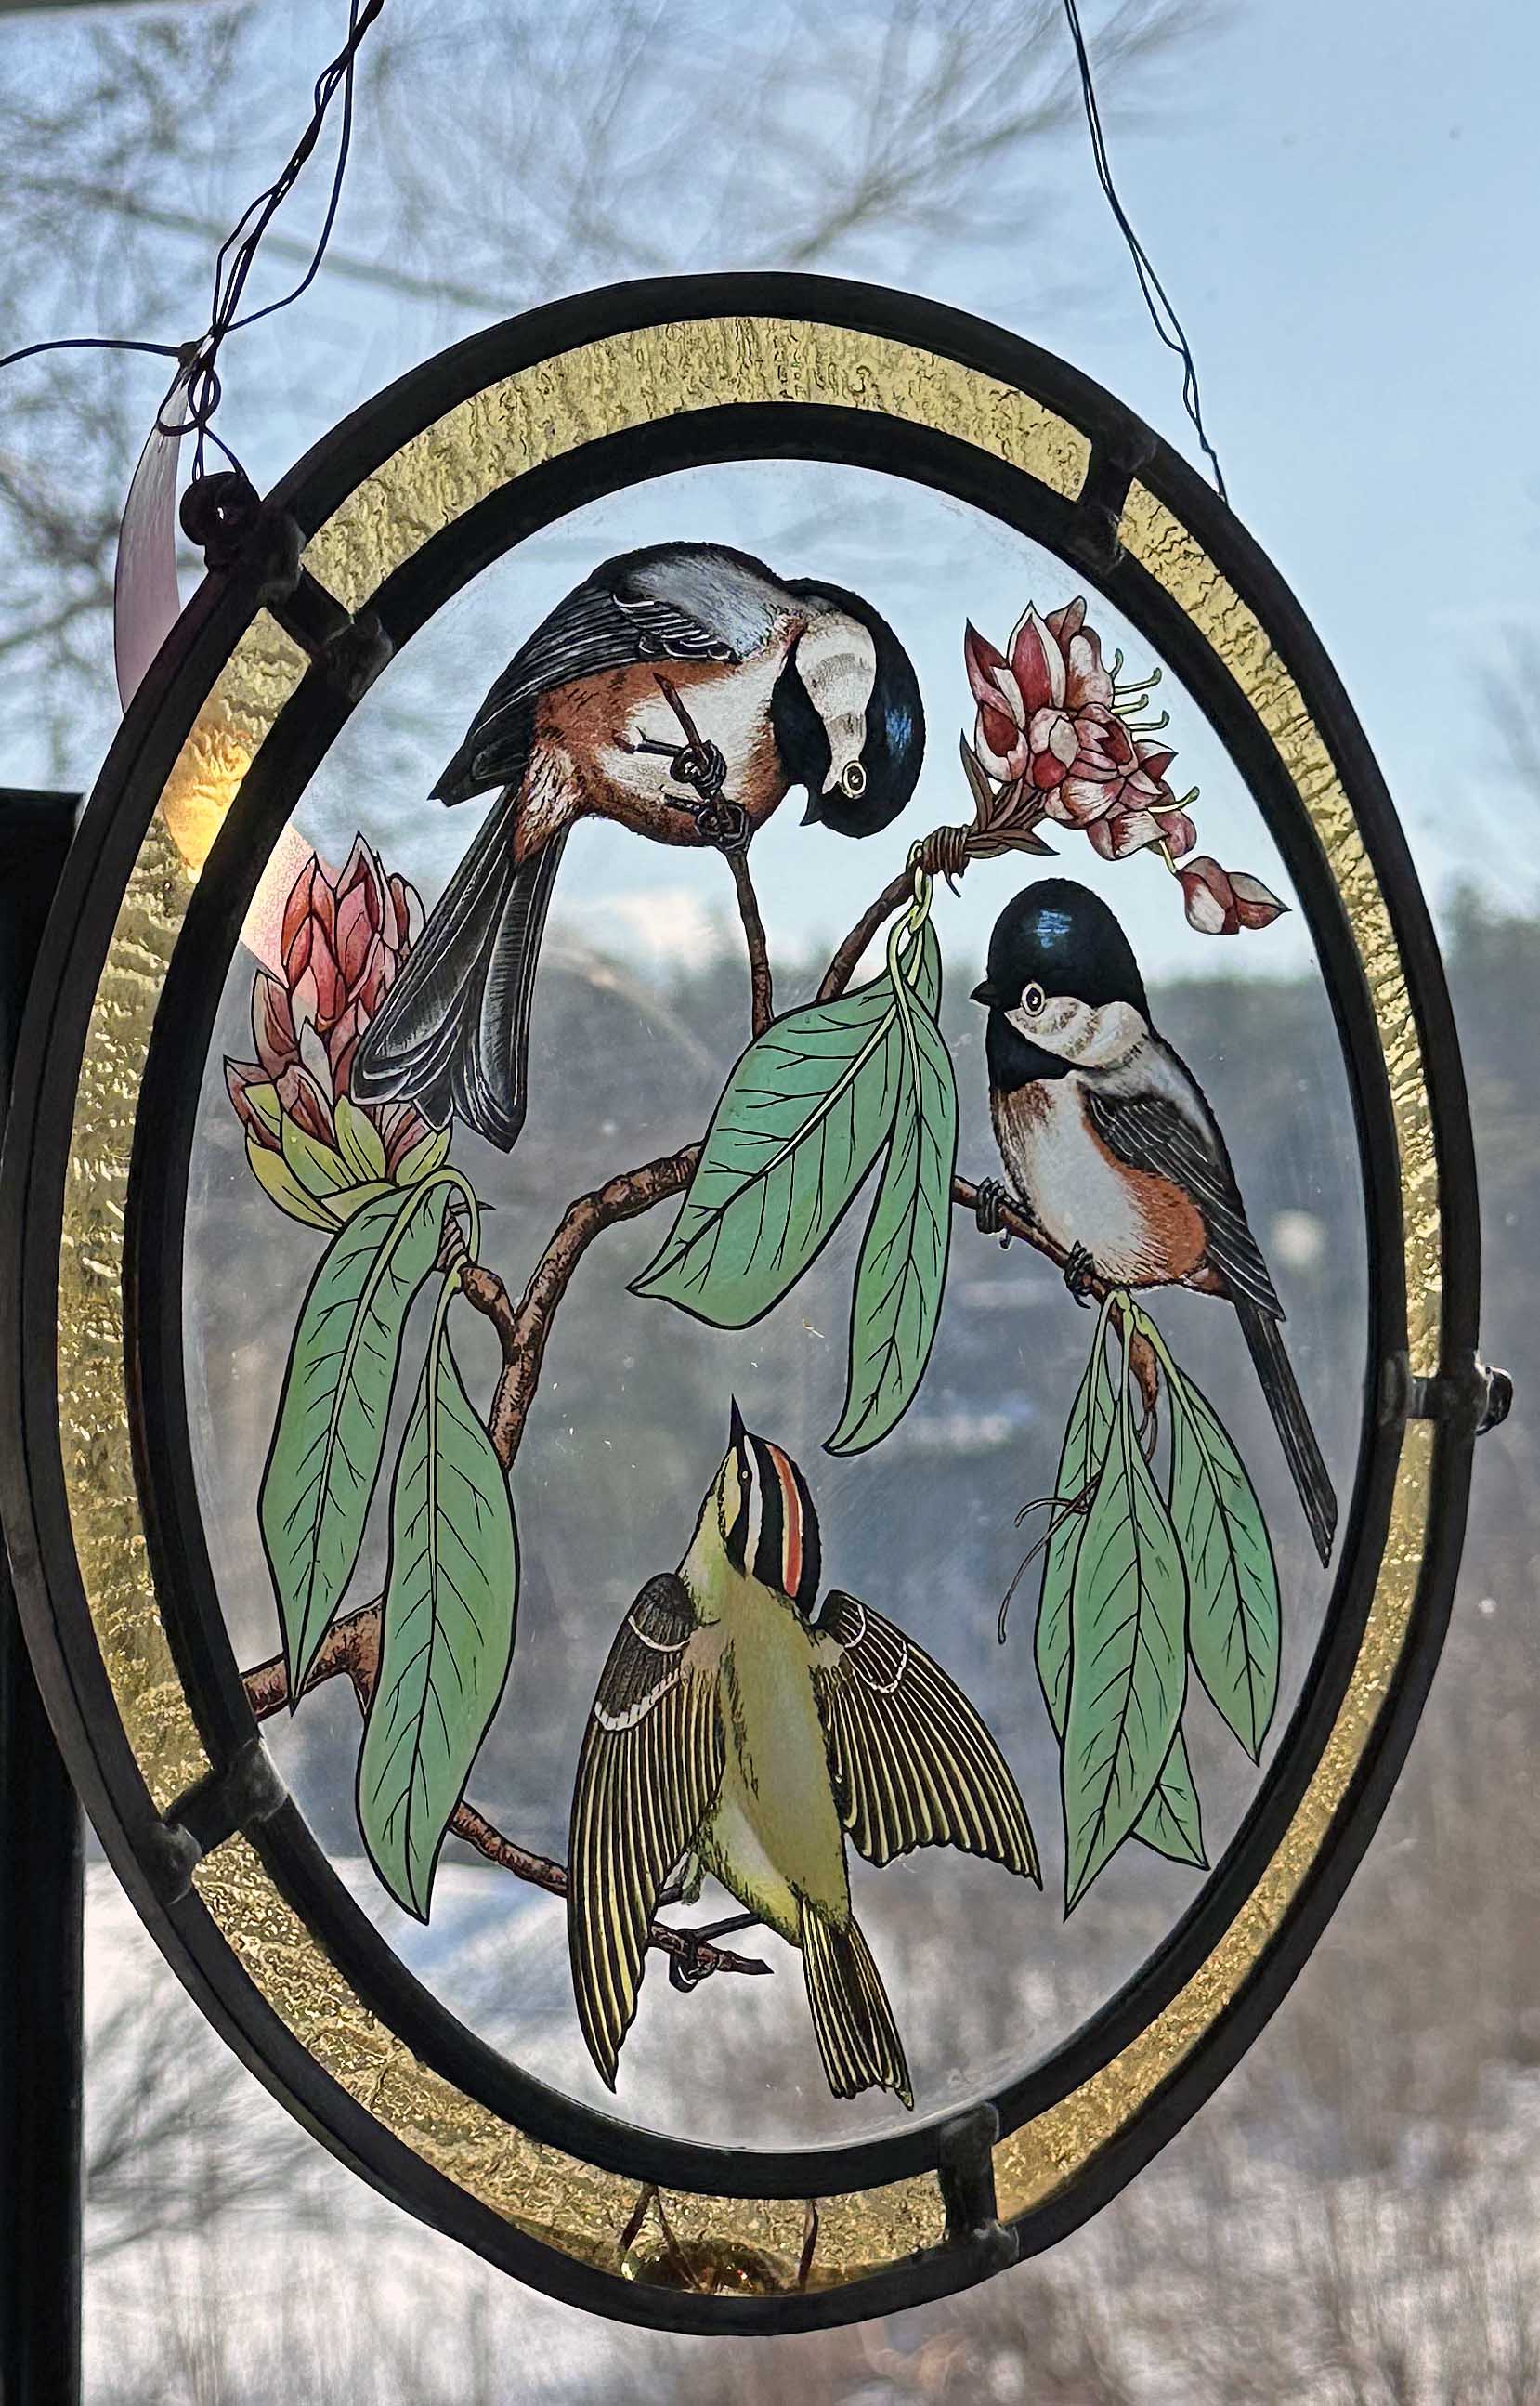 1979 Stained Glass Birds
made by Glassmaster
10 In x 10.5 In.